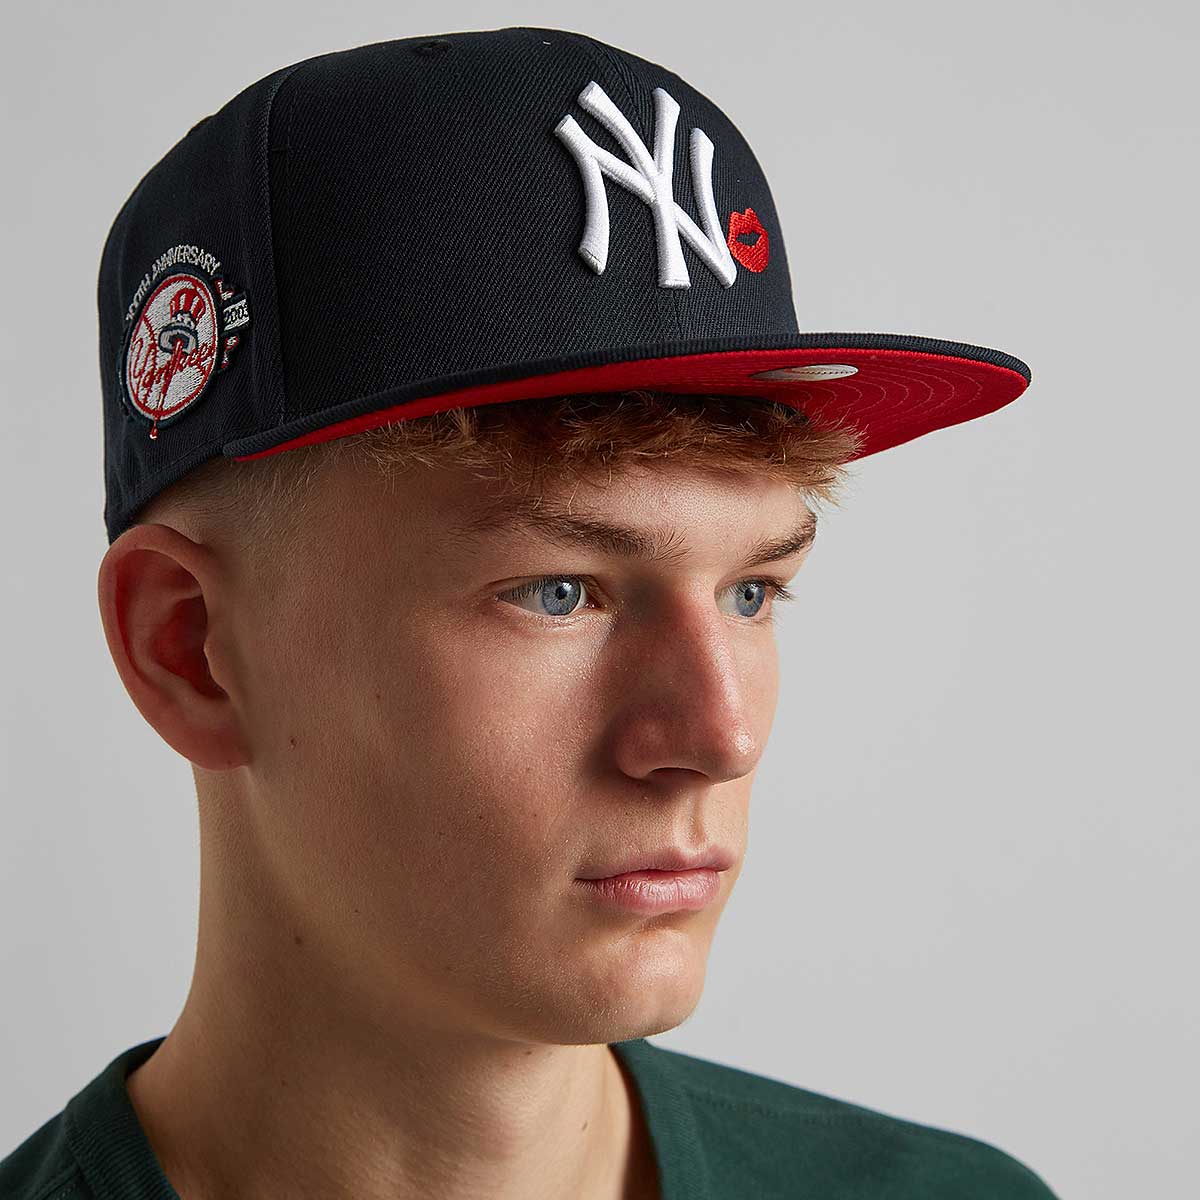 Navy Blue New York Yankees MLB Patch Work New Era Fitted Hat